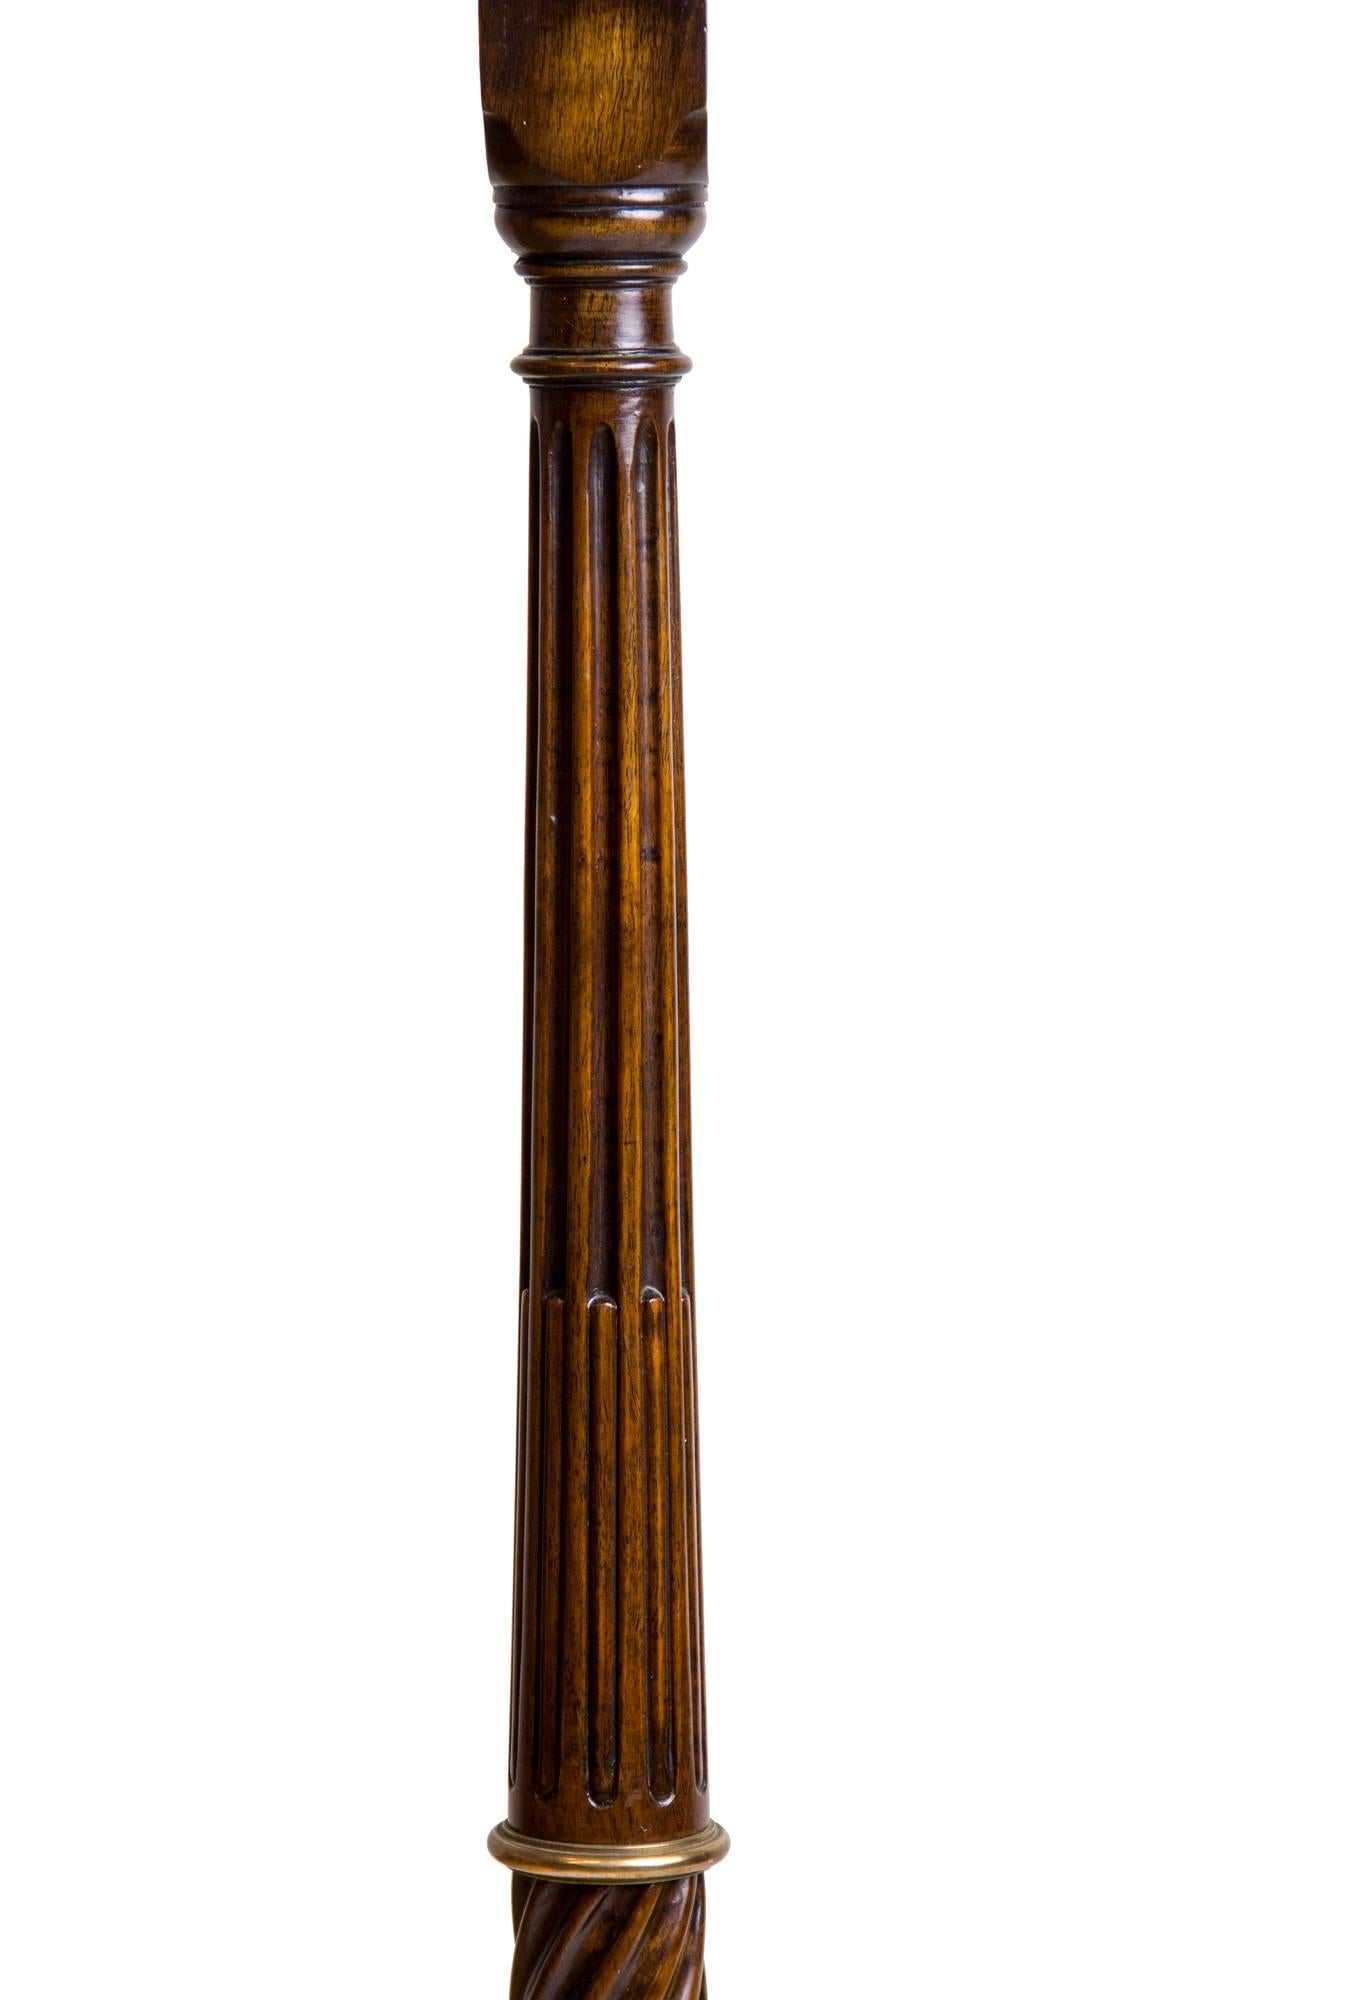 Carved Fine Replica of the Daniel Quare Hanging/Standing Barometer, 19th Century For Sale